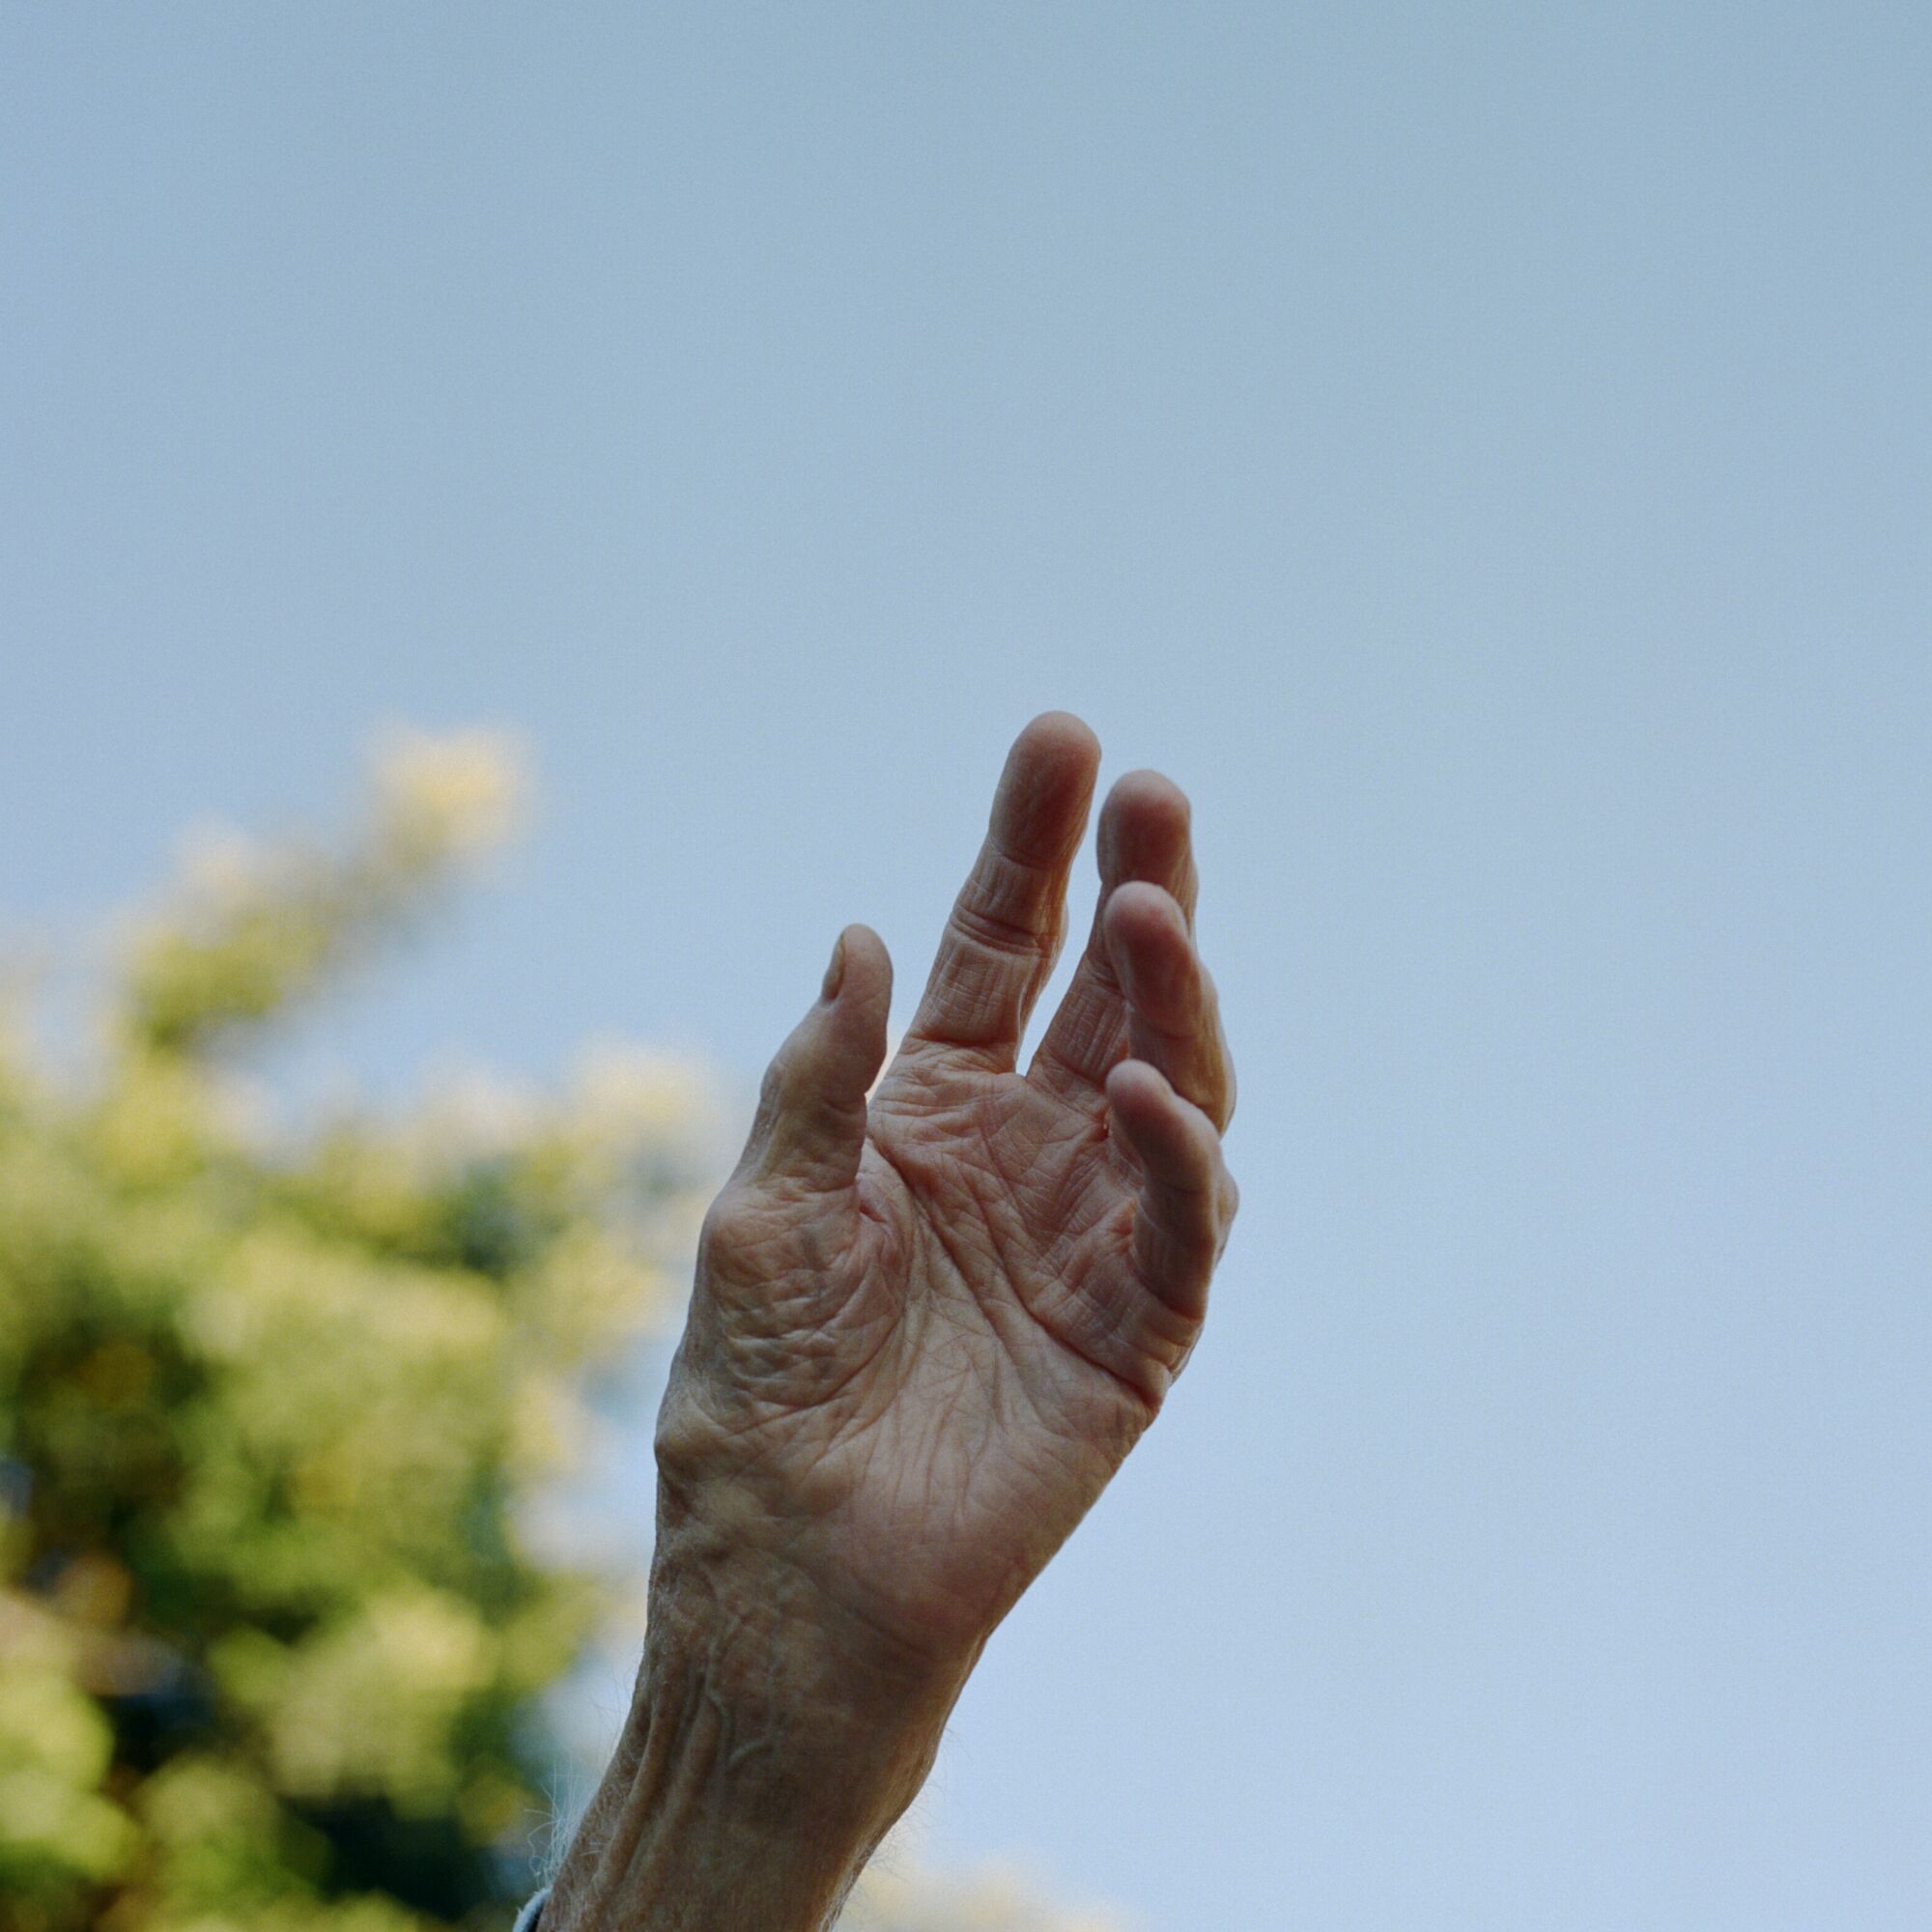 Andrzej holds up his hand to the sky. His hands, which ached for years after the war, are "still not normal," he says.